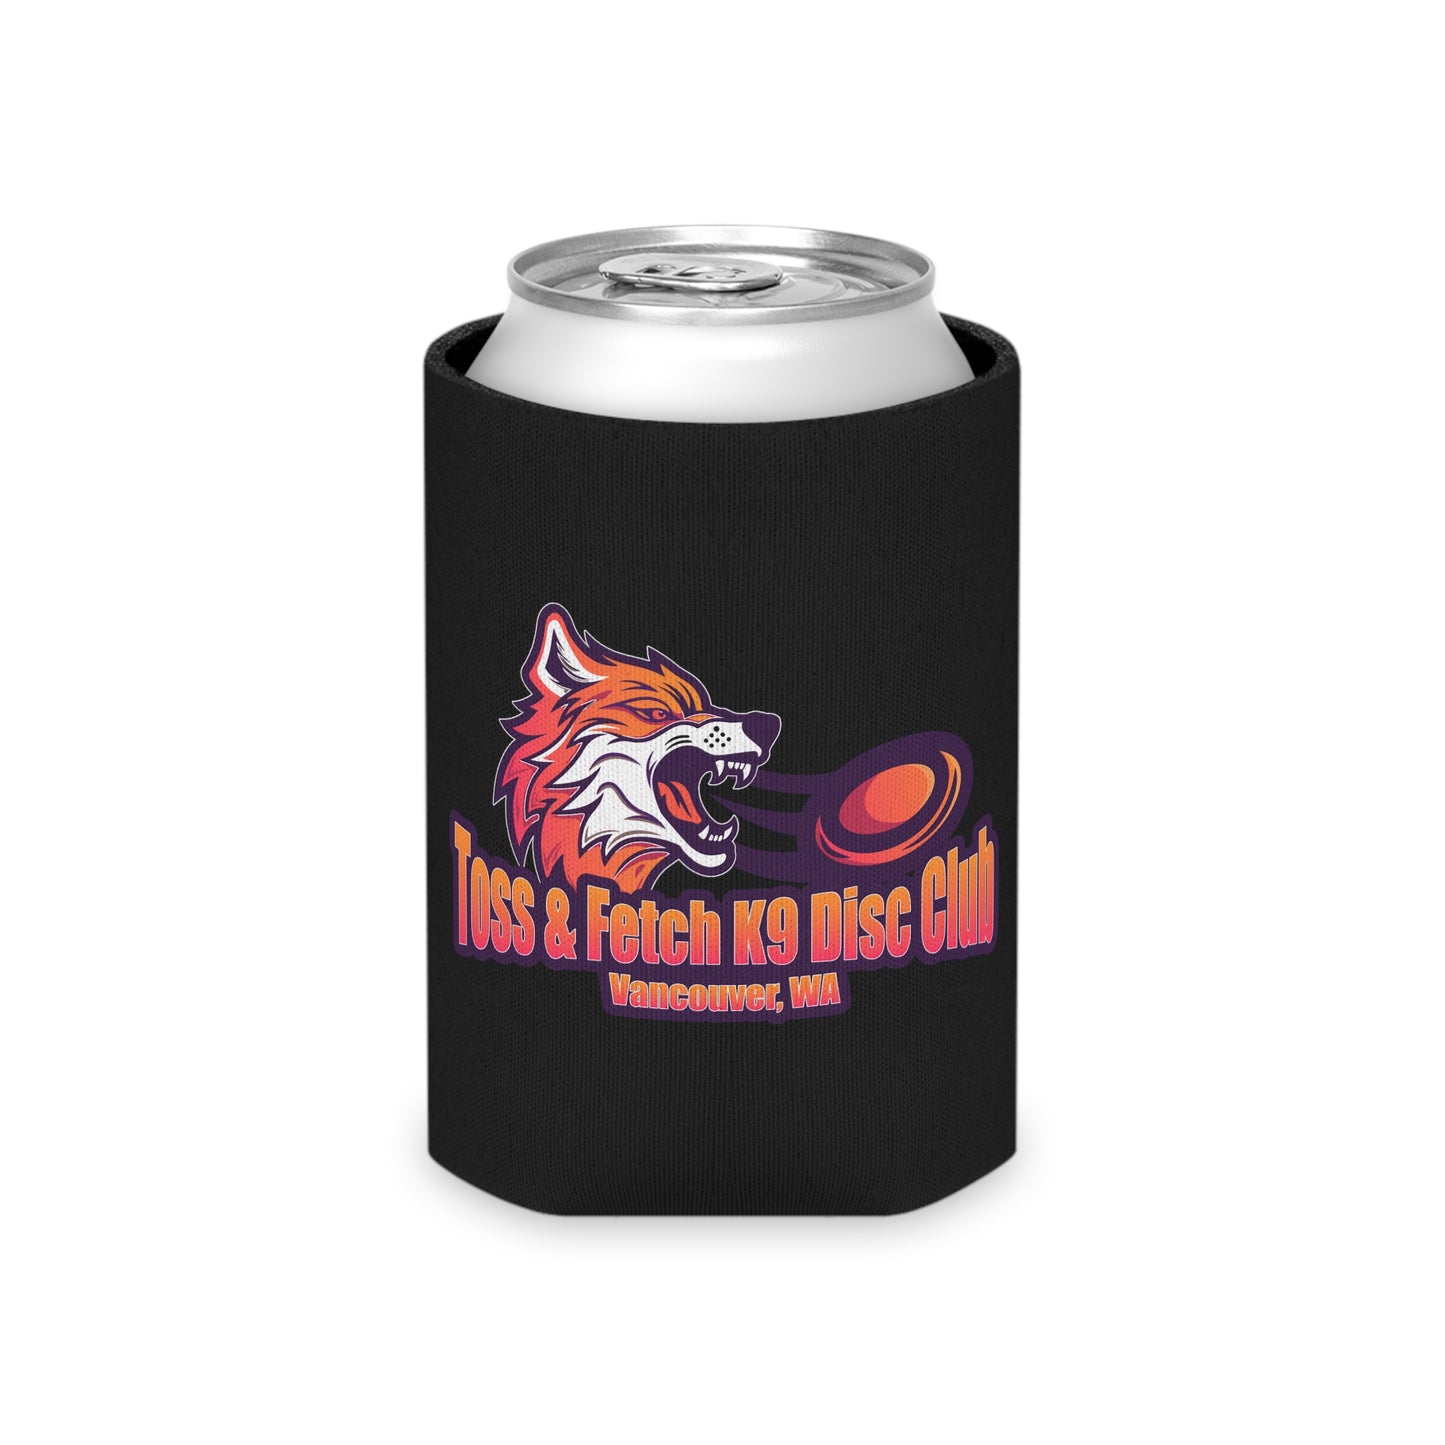 Toss & Fetch - Vancouver, WA Can Cooler